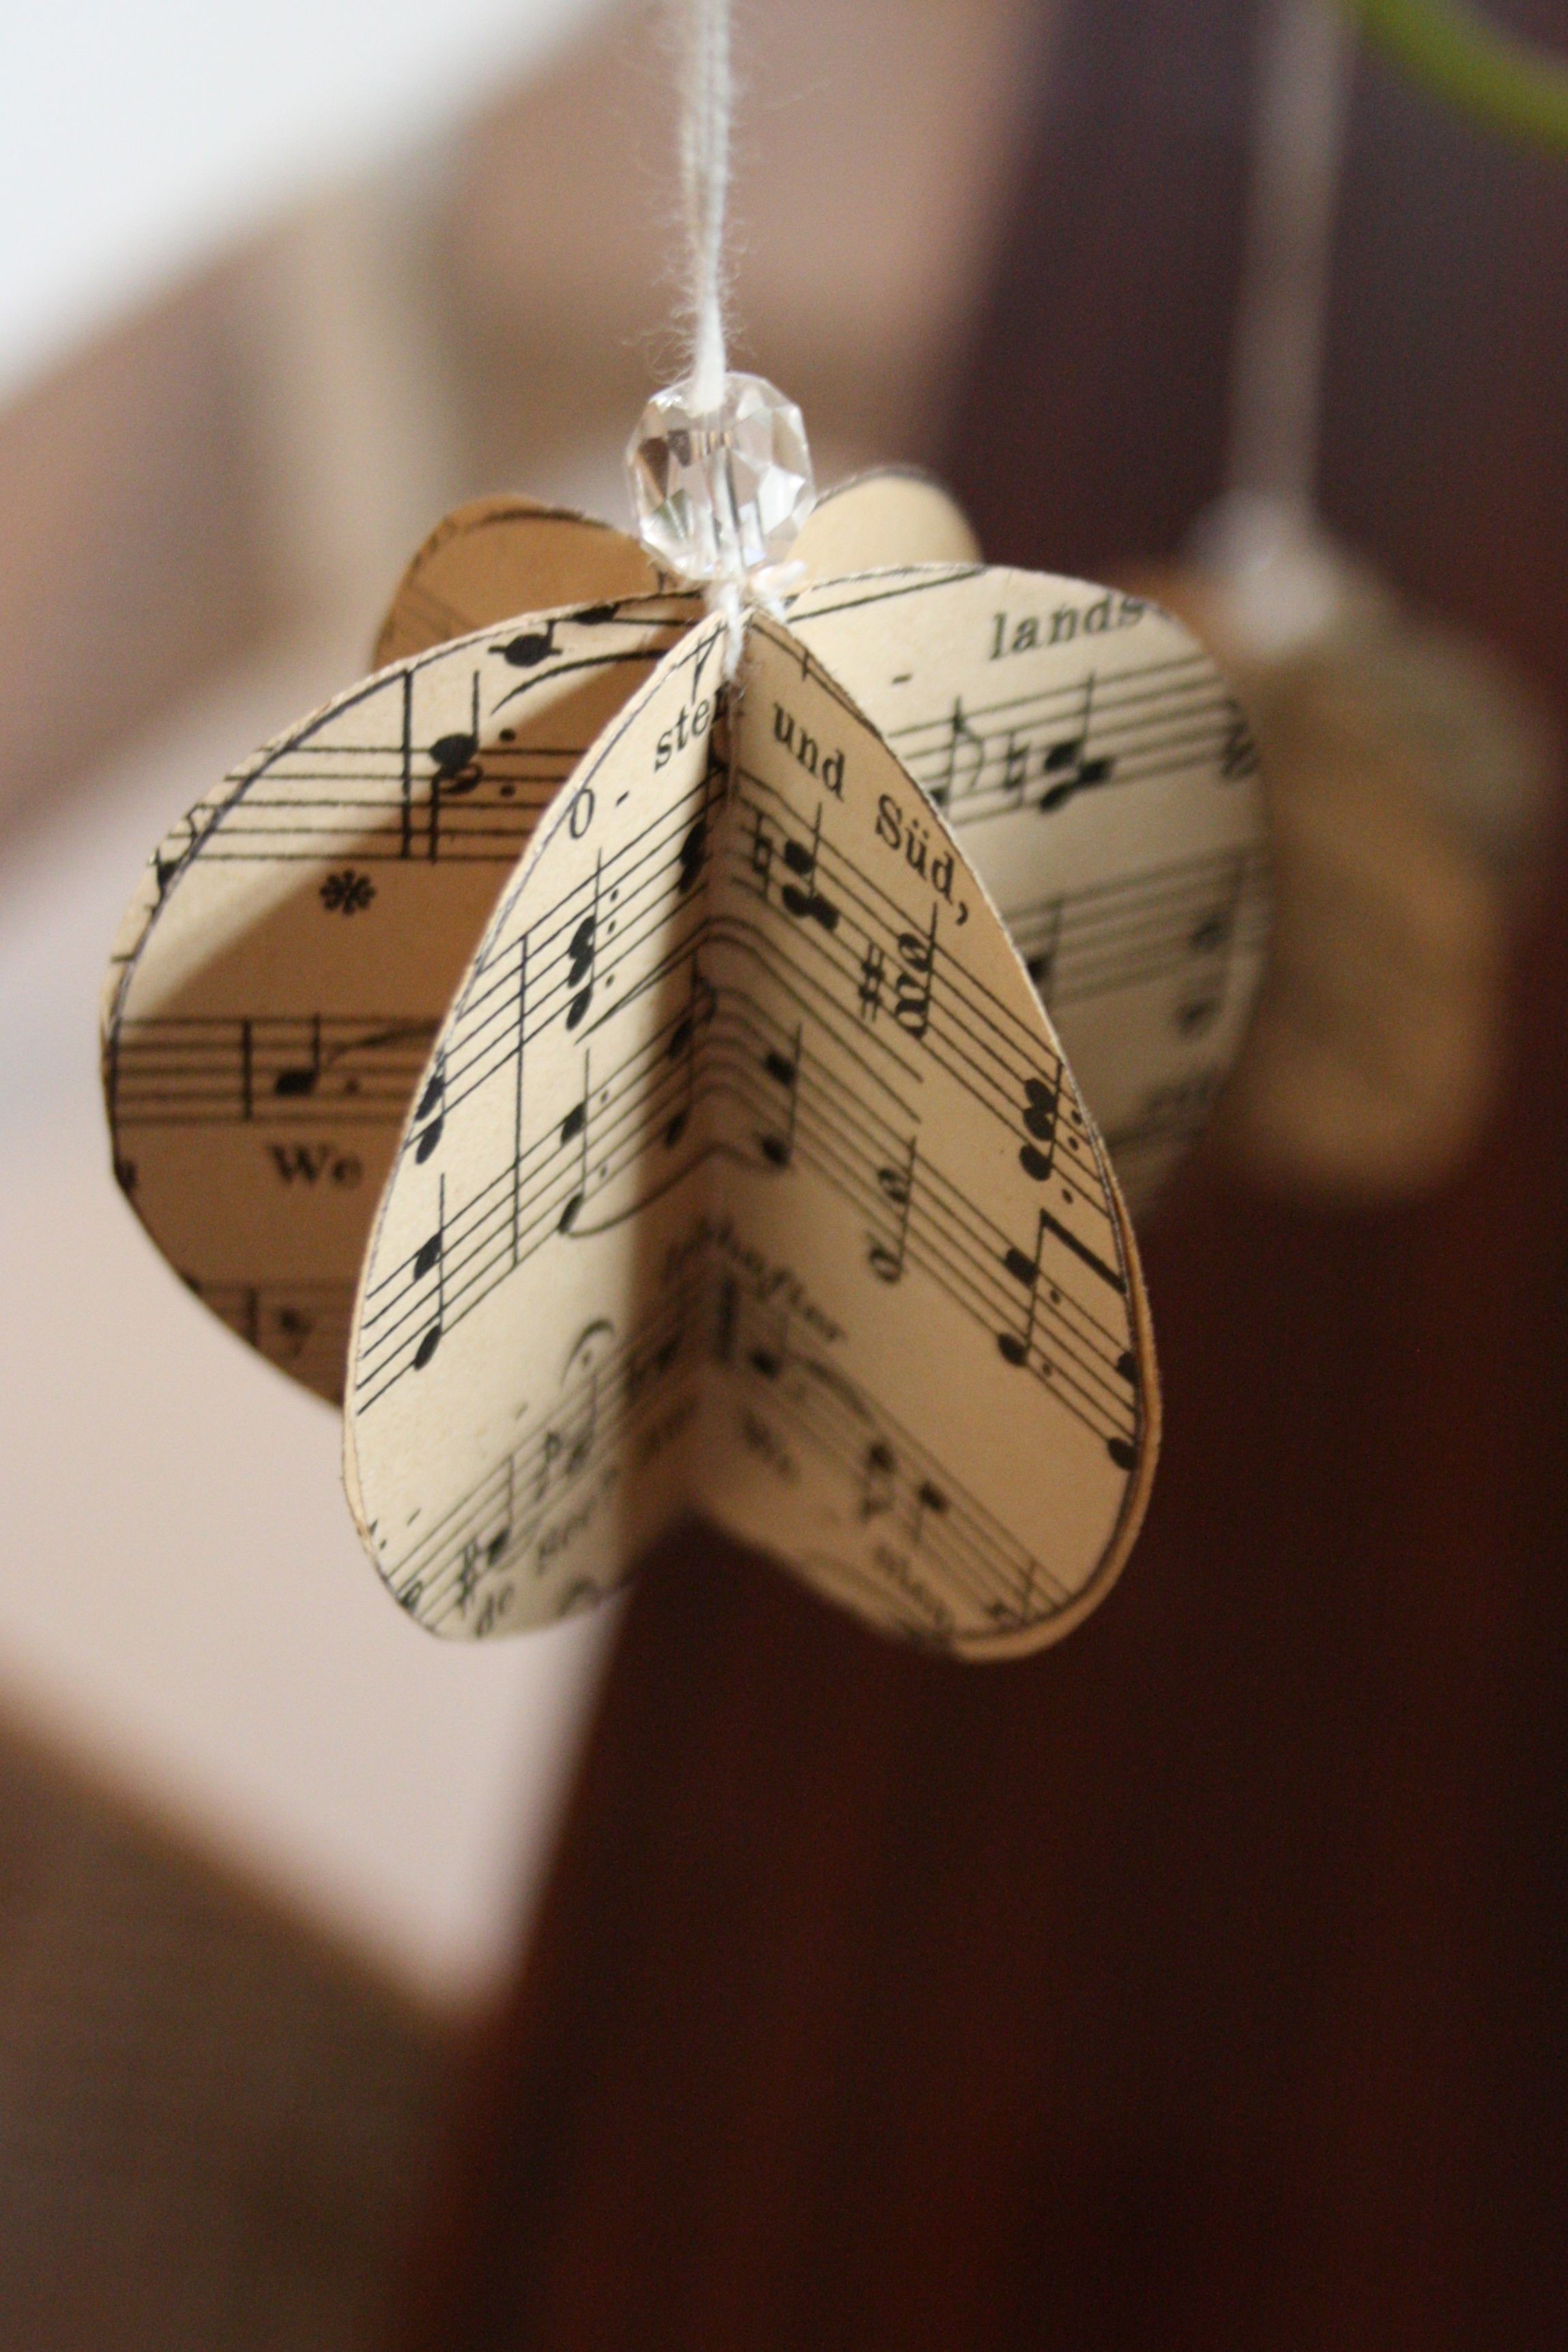 Papercraft Christmas ornaments these Paper Christmas ornaments are totally Adorable This is Such A